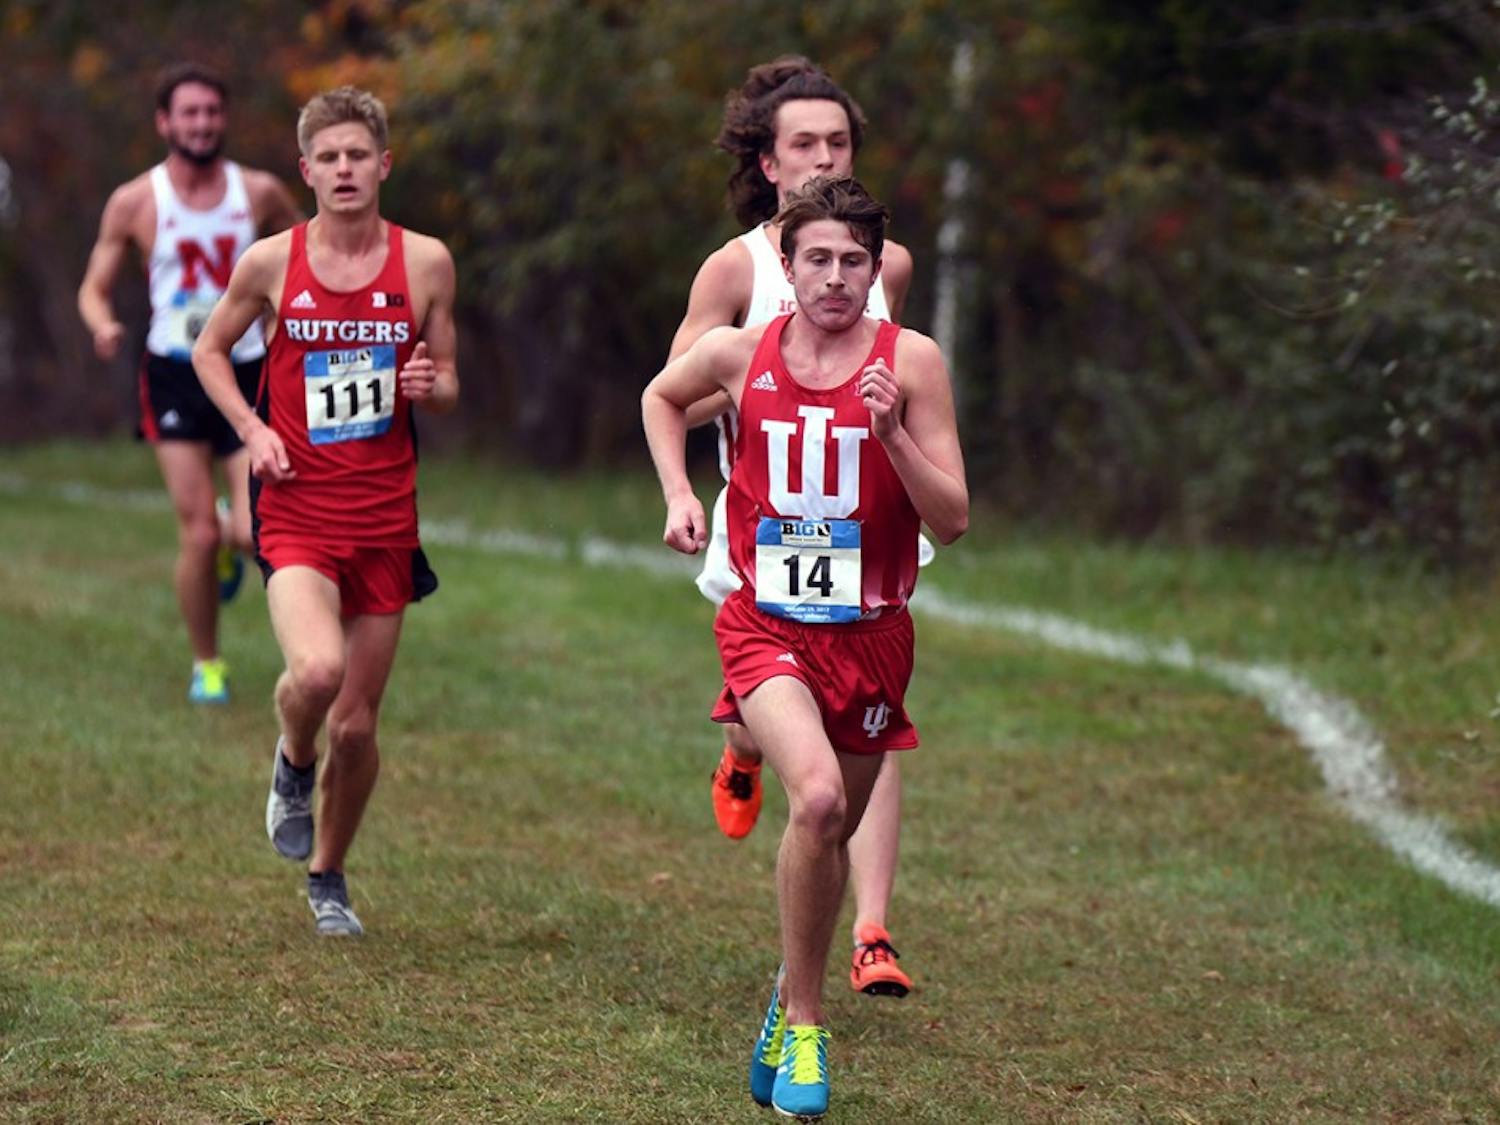 GALLERY: IU Cross Country competes in the 2017 Big Ten Championship